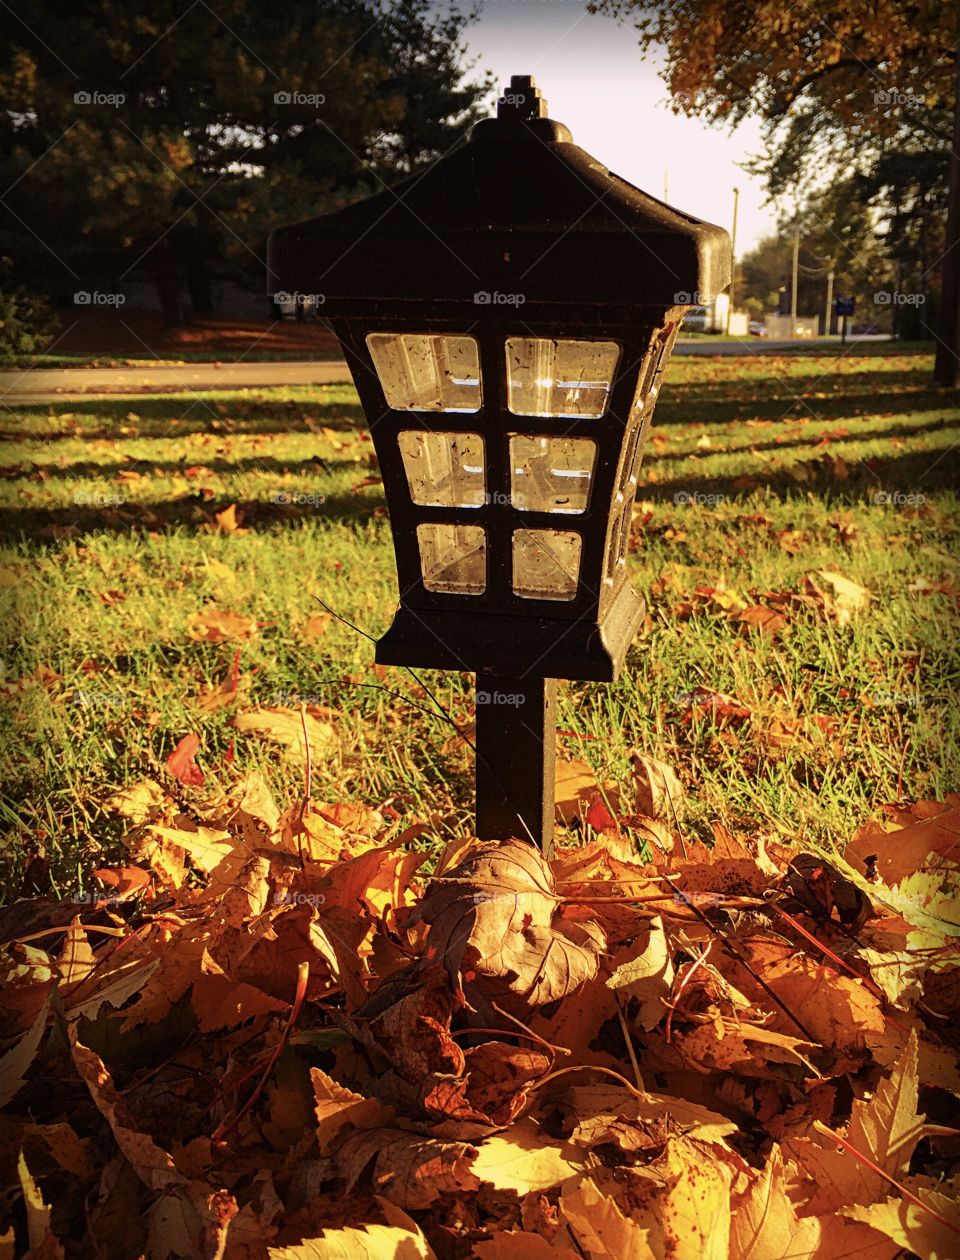 Lamppost in autumn leaves